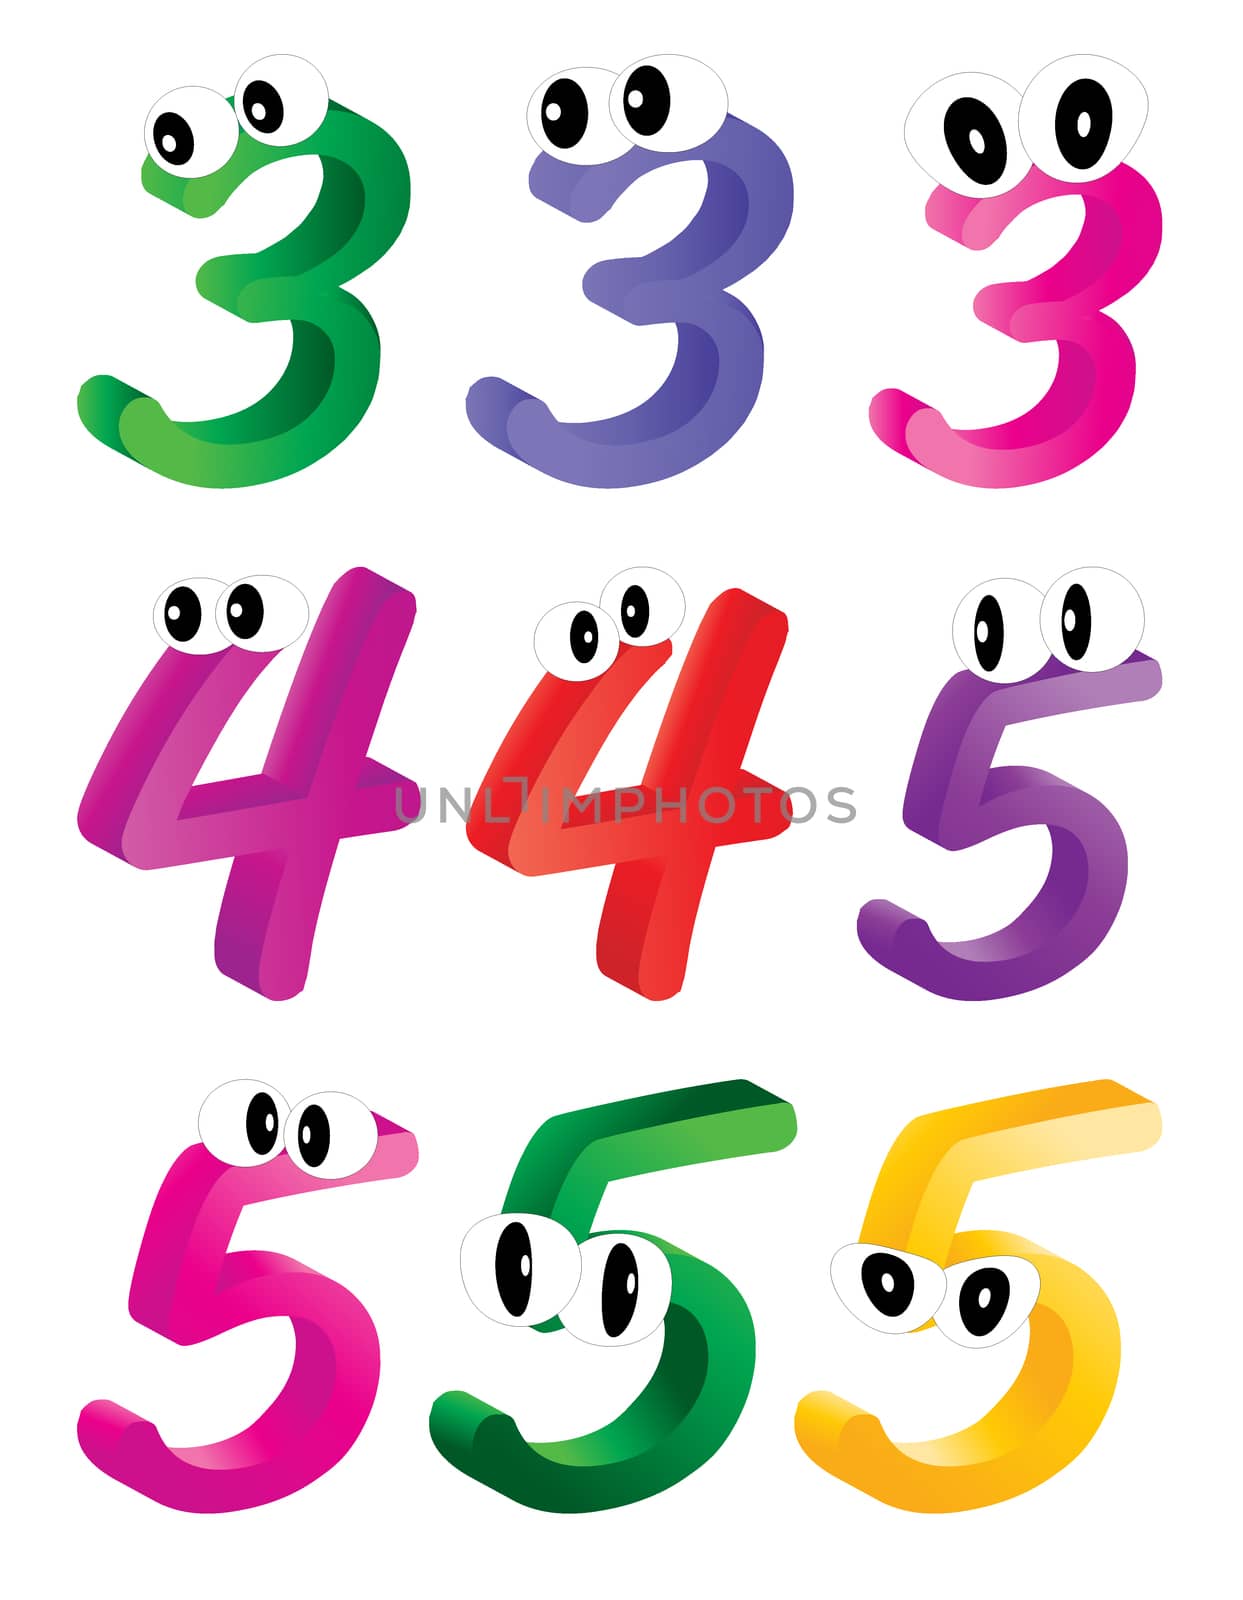 Image of cartoon number, digit three, four, five with eyes. Funny, cheerful and colorful illustration for children isolated on white background.